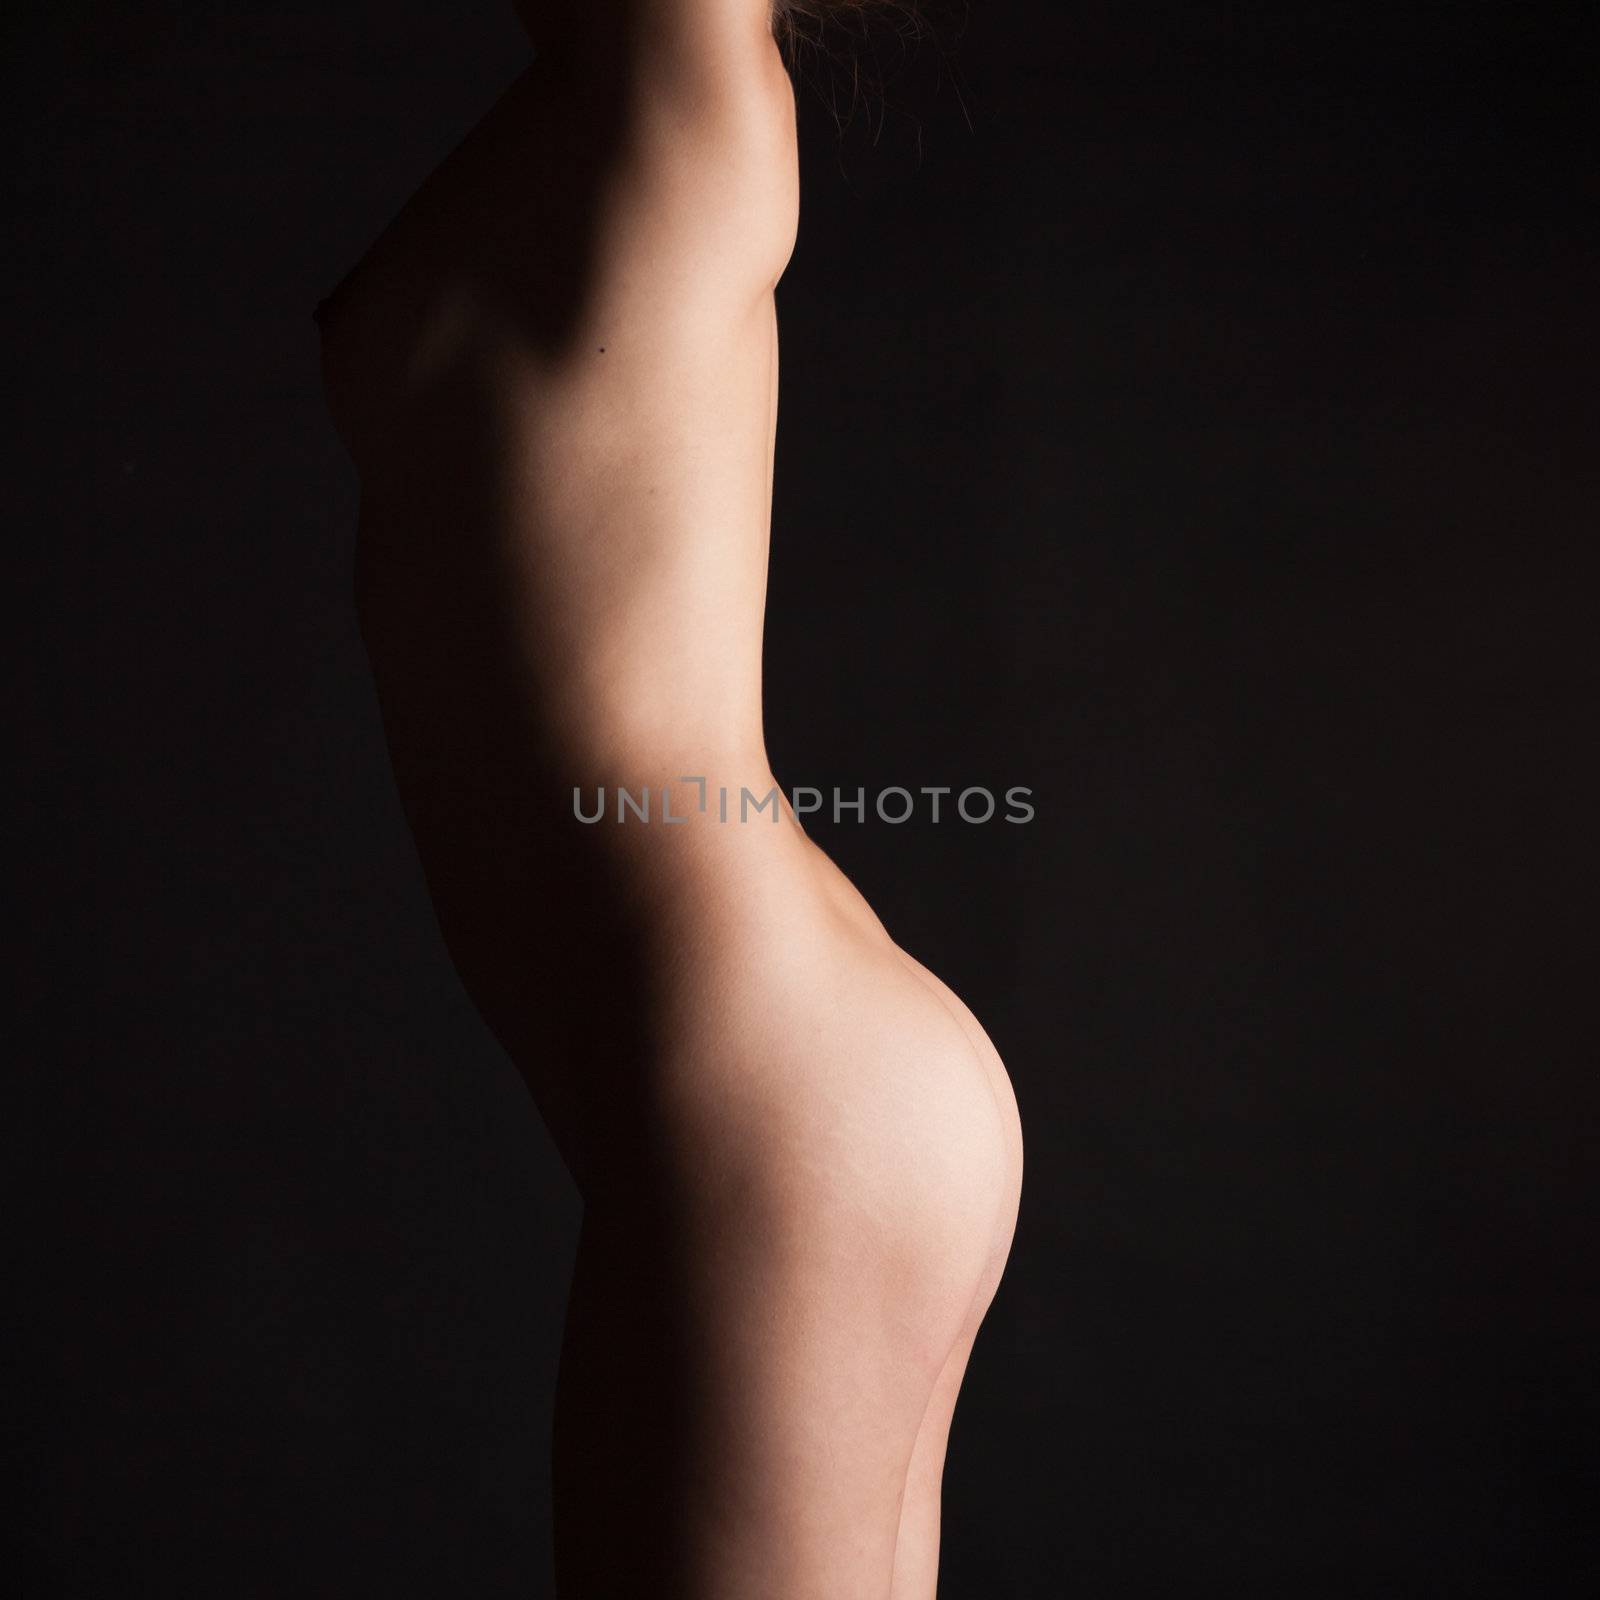 Naked body of a teenage girl. On a black background.